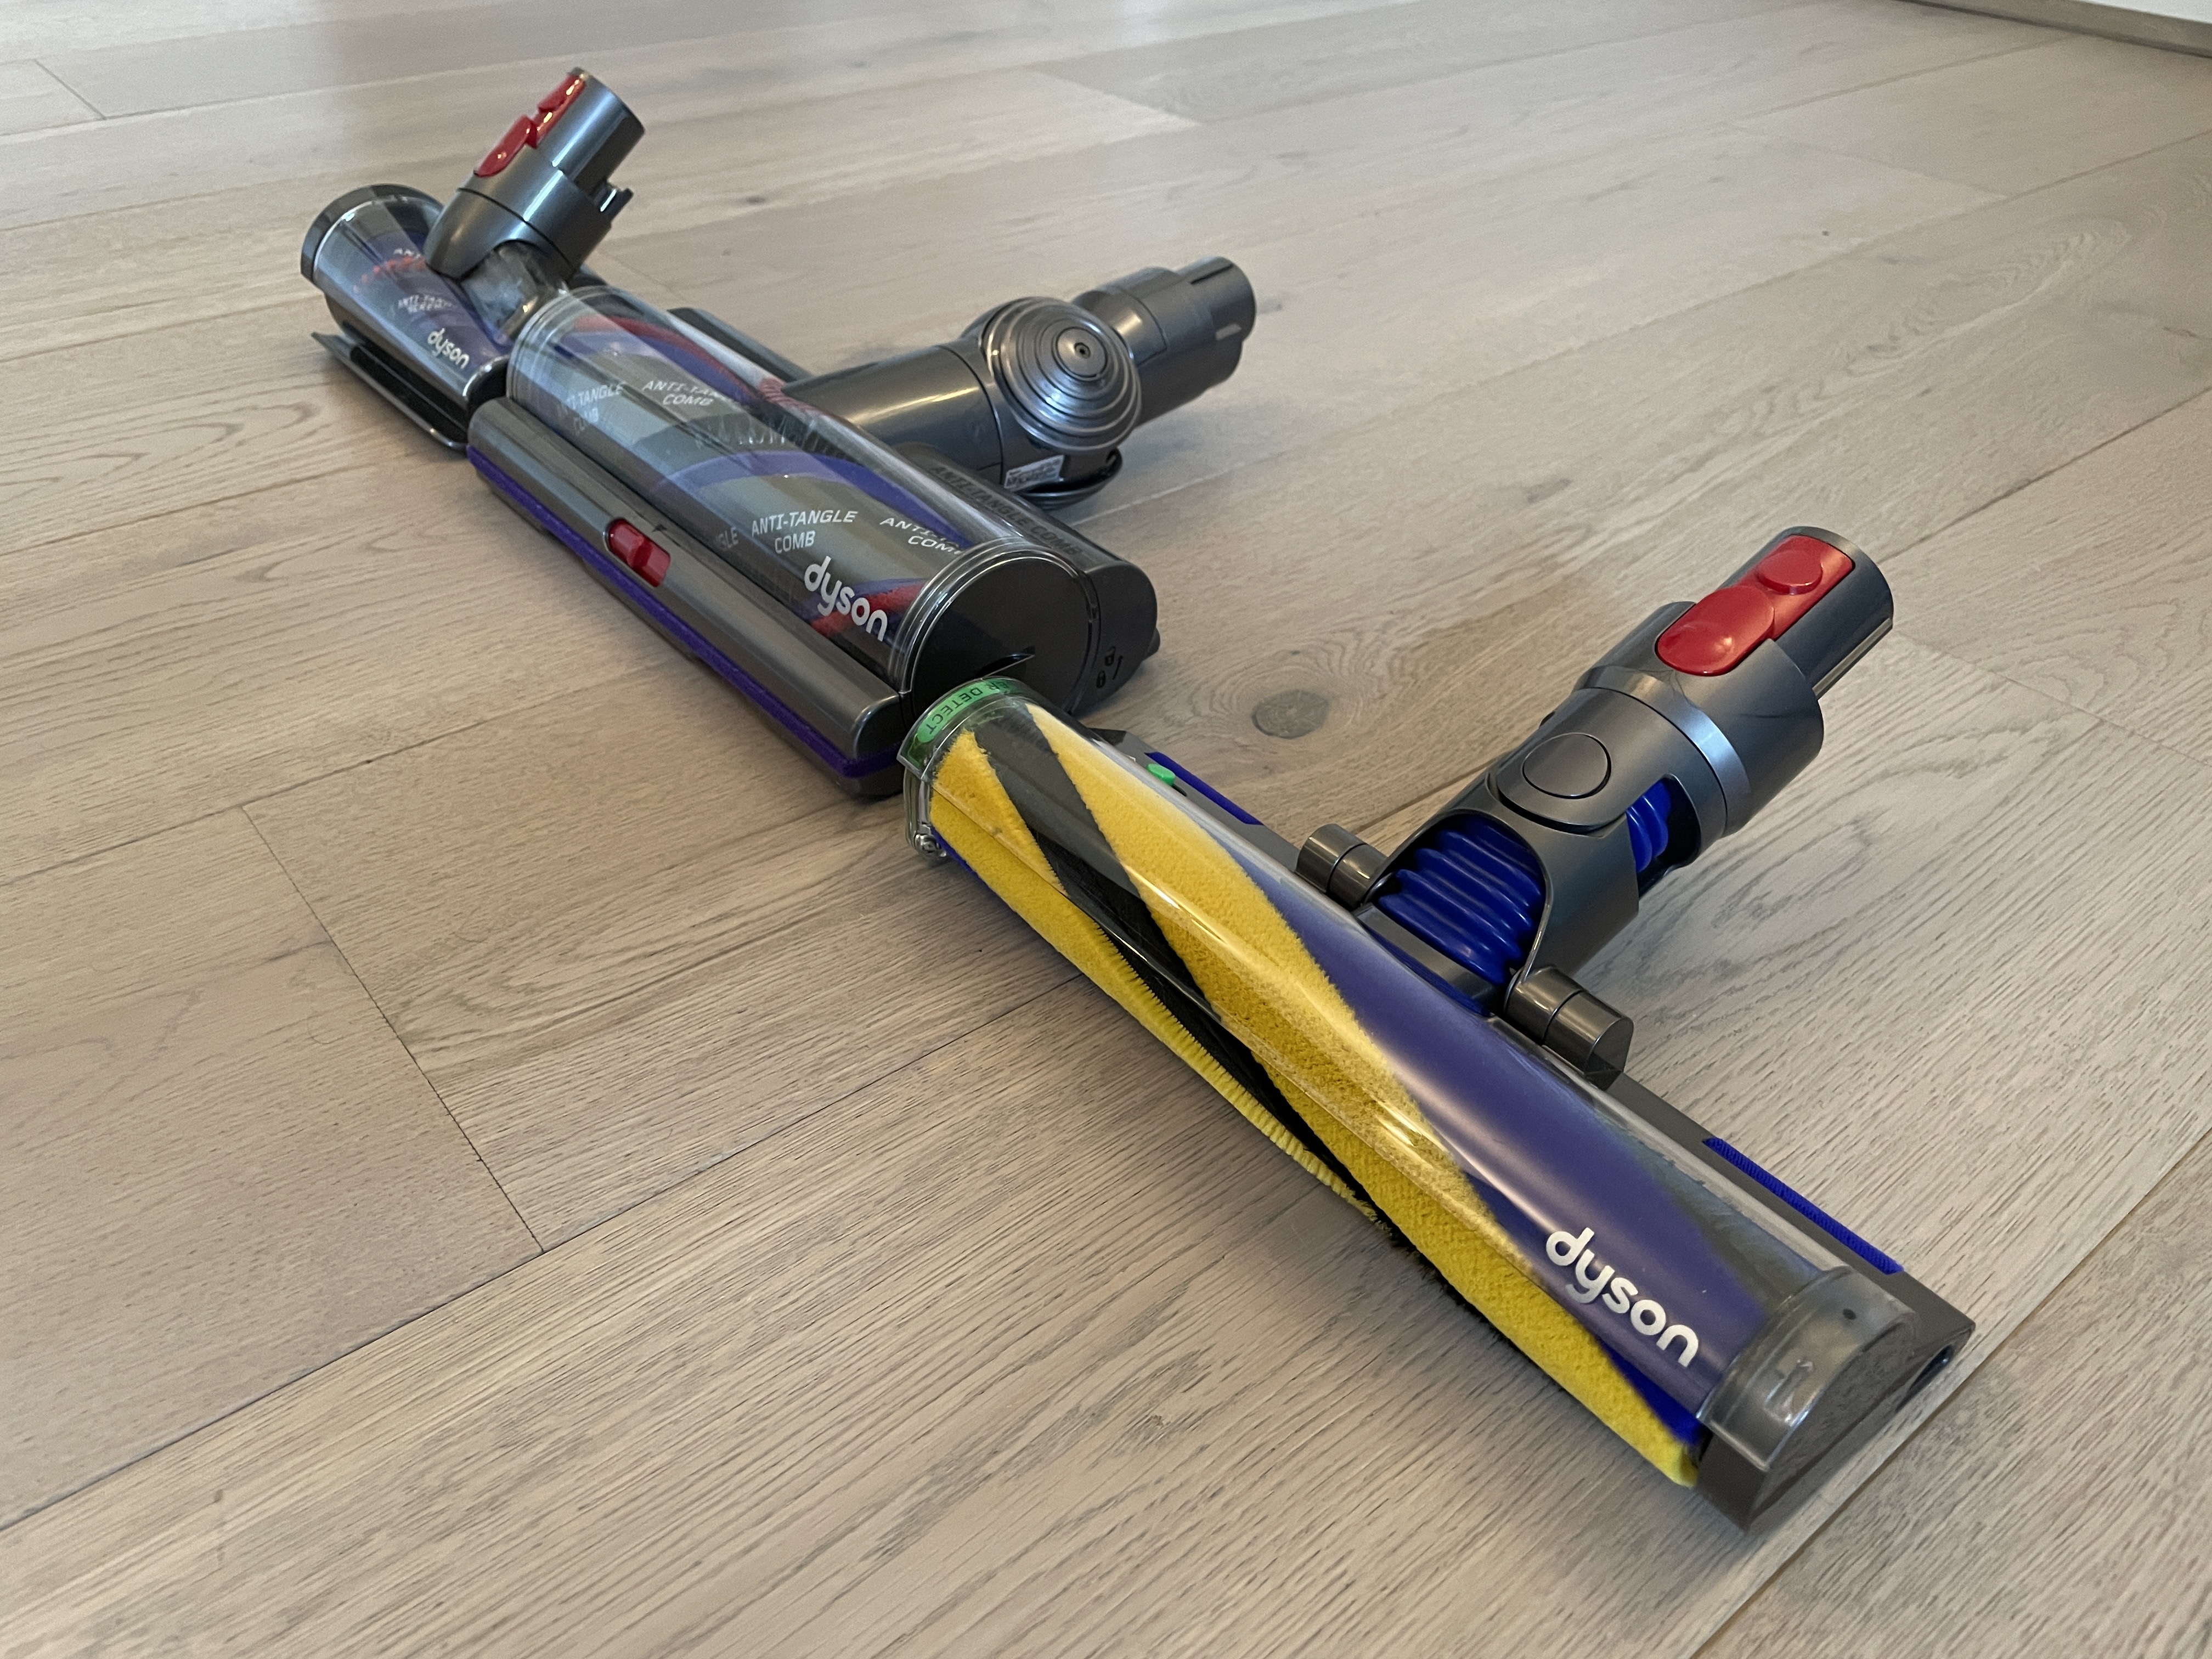 Dyson V15 Detect Absolute price: I should see so mucky